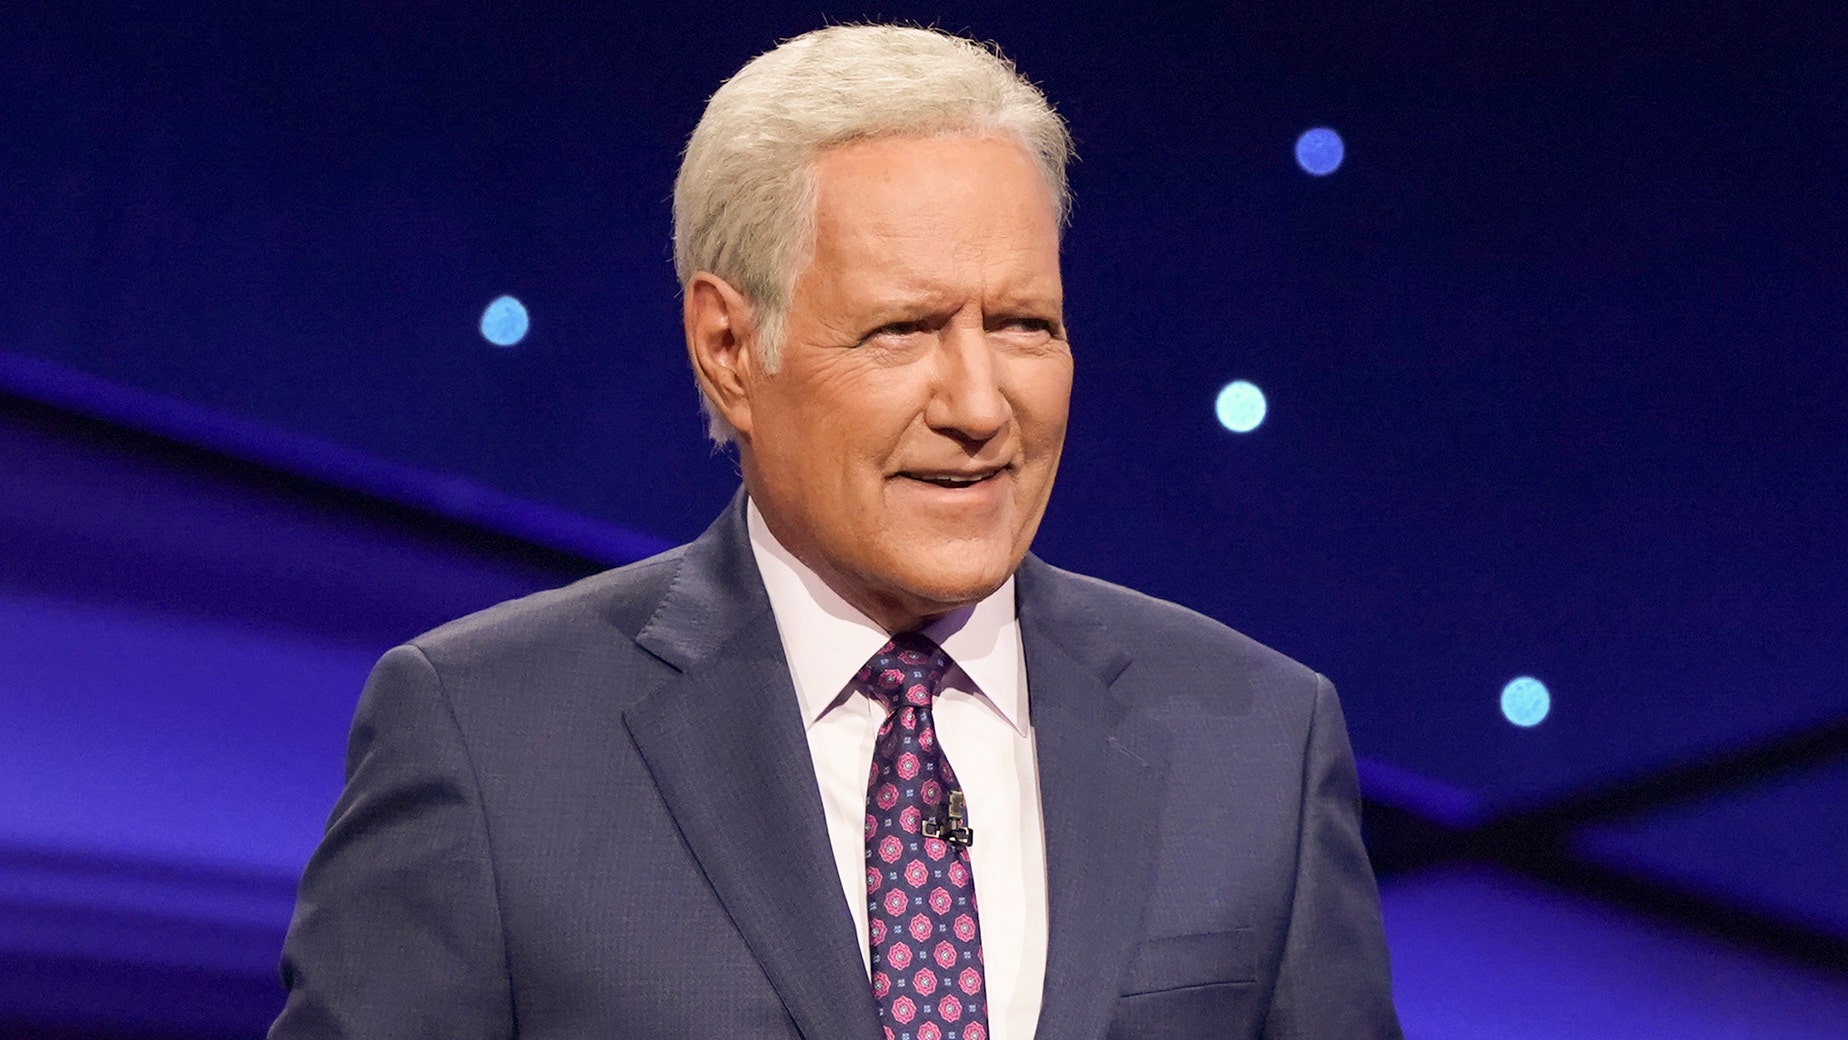 Alex Trebek’s daughter praises the late host of ‘Jeopardy’ after his last episode: ‘You were extraordinary’